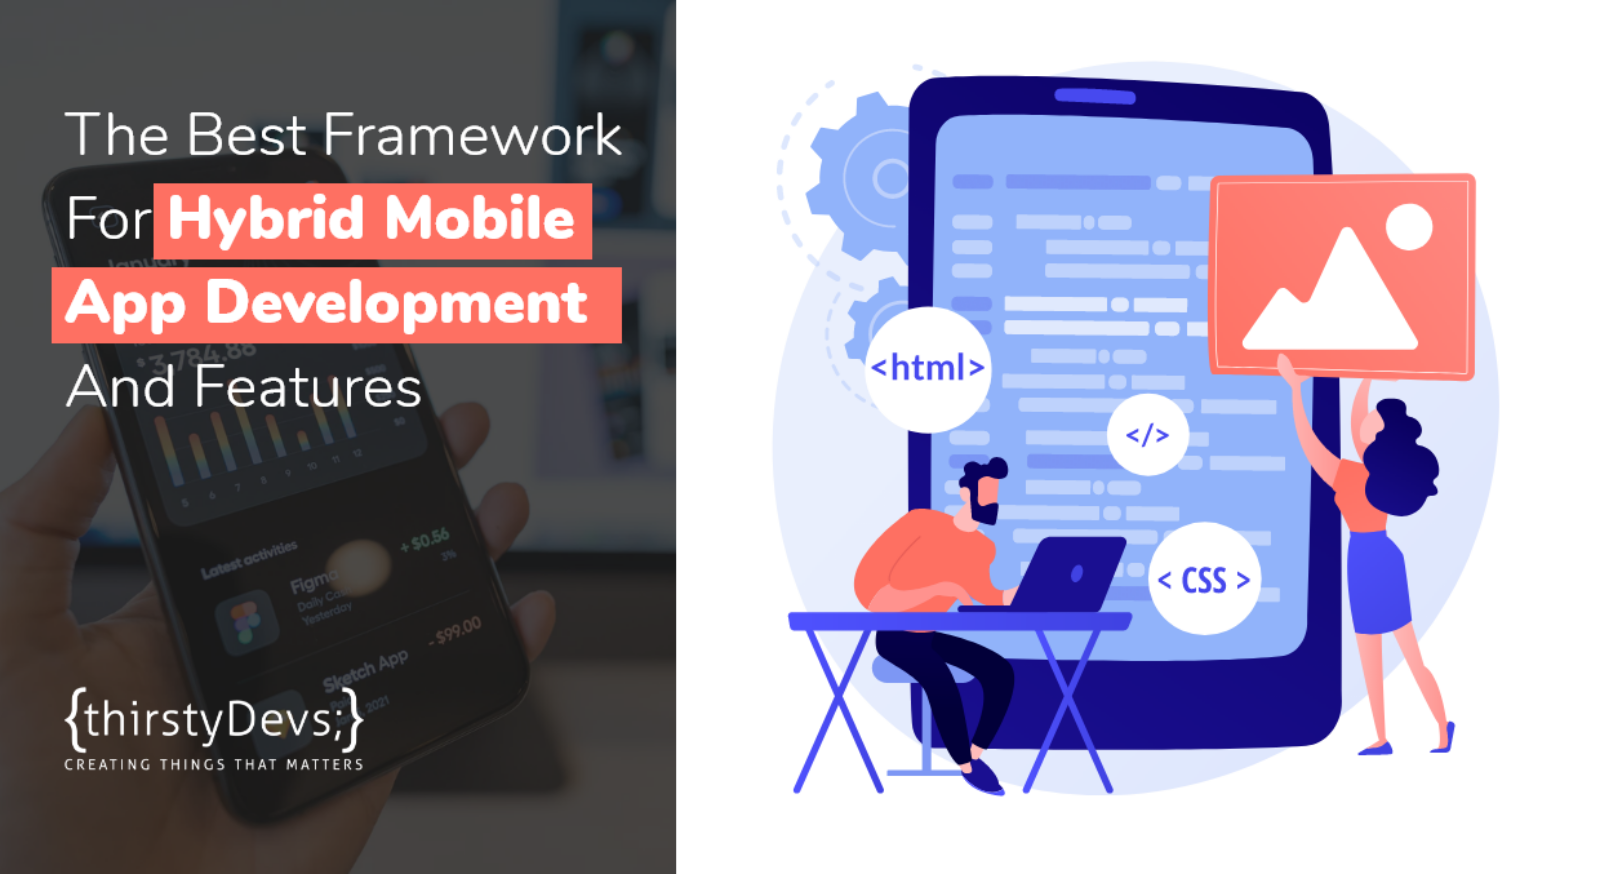 Are You Thinking Of Building Startups? Build It With The Best Hybrid App Development Framework